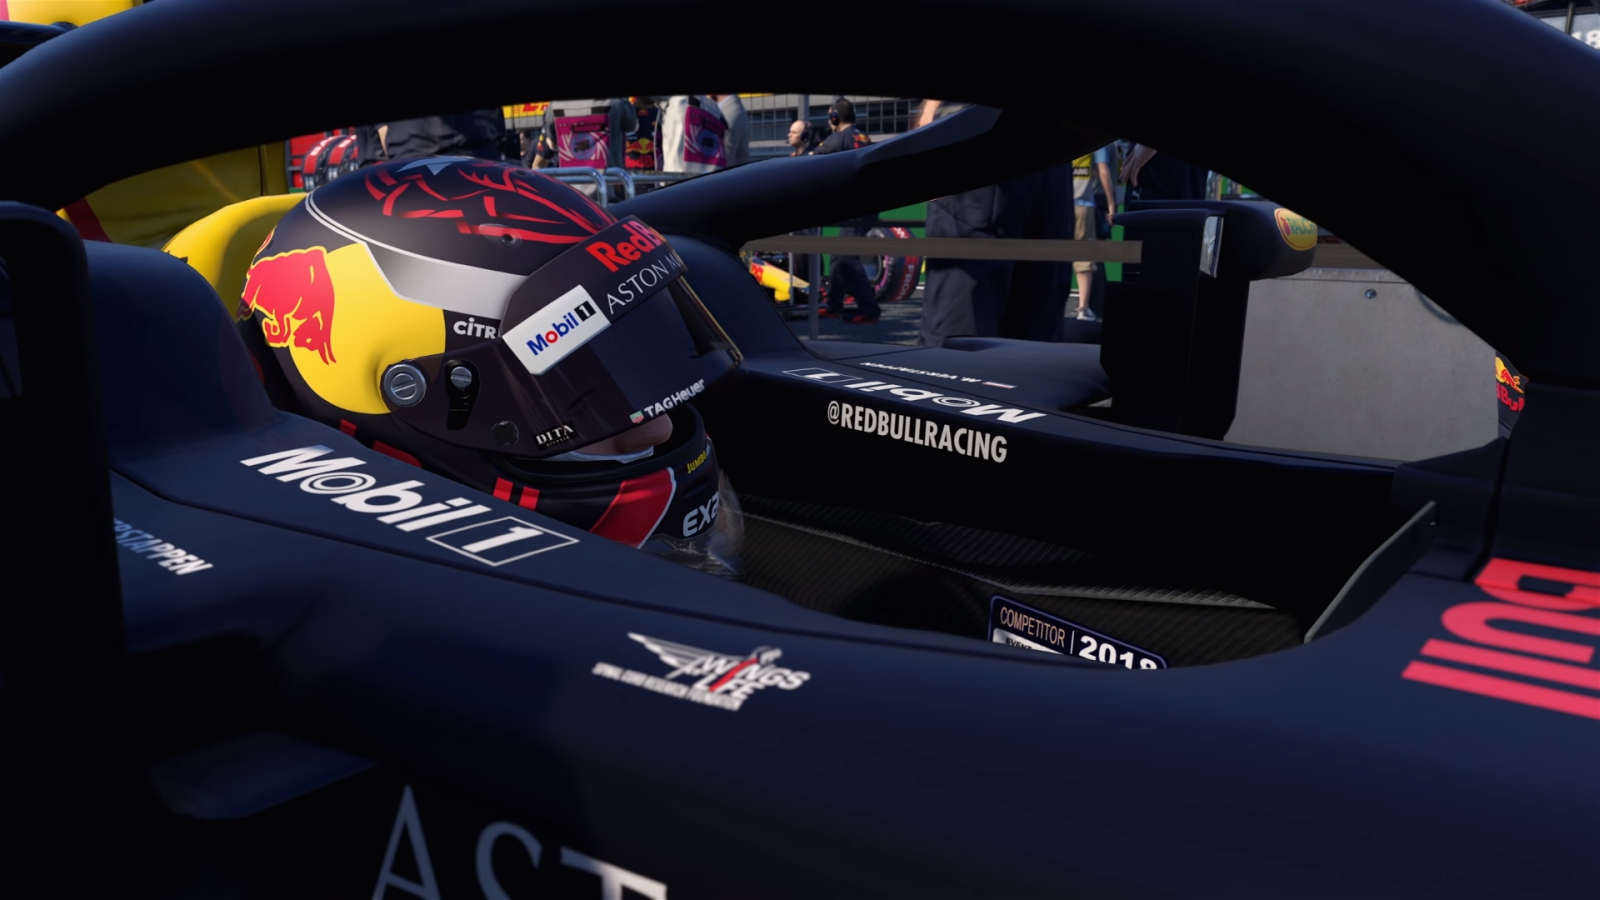 F1 2018 - Gamereview